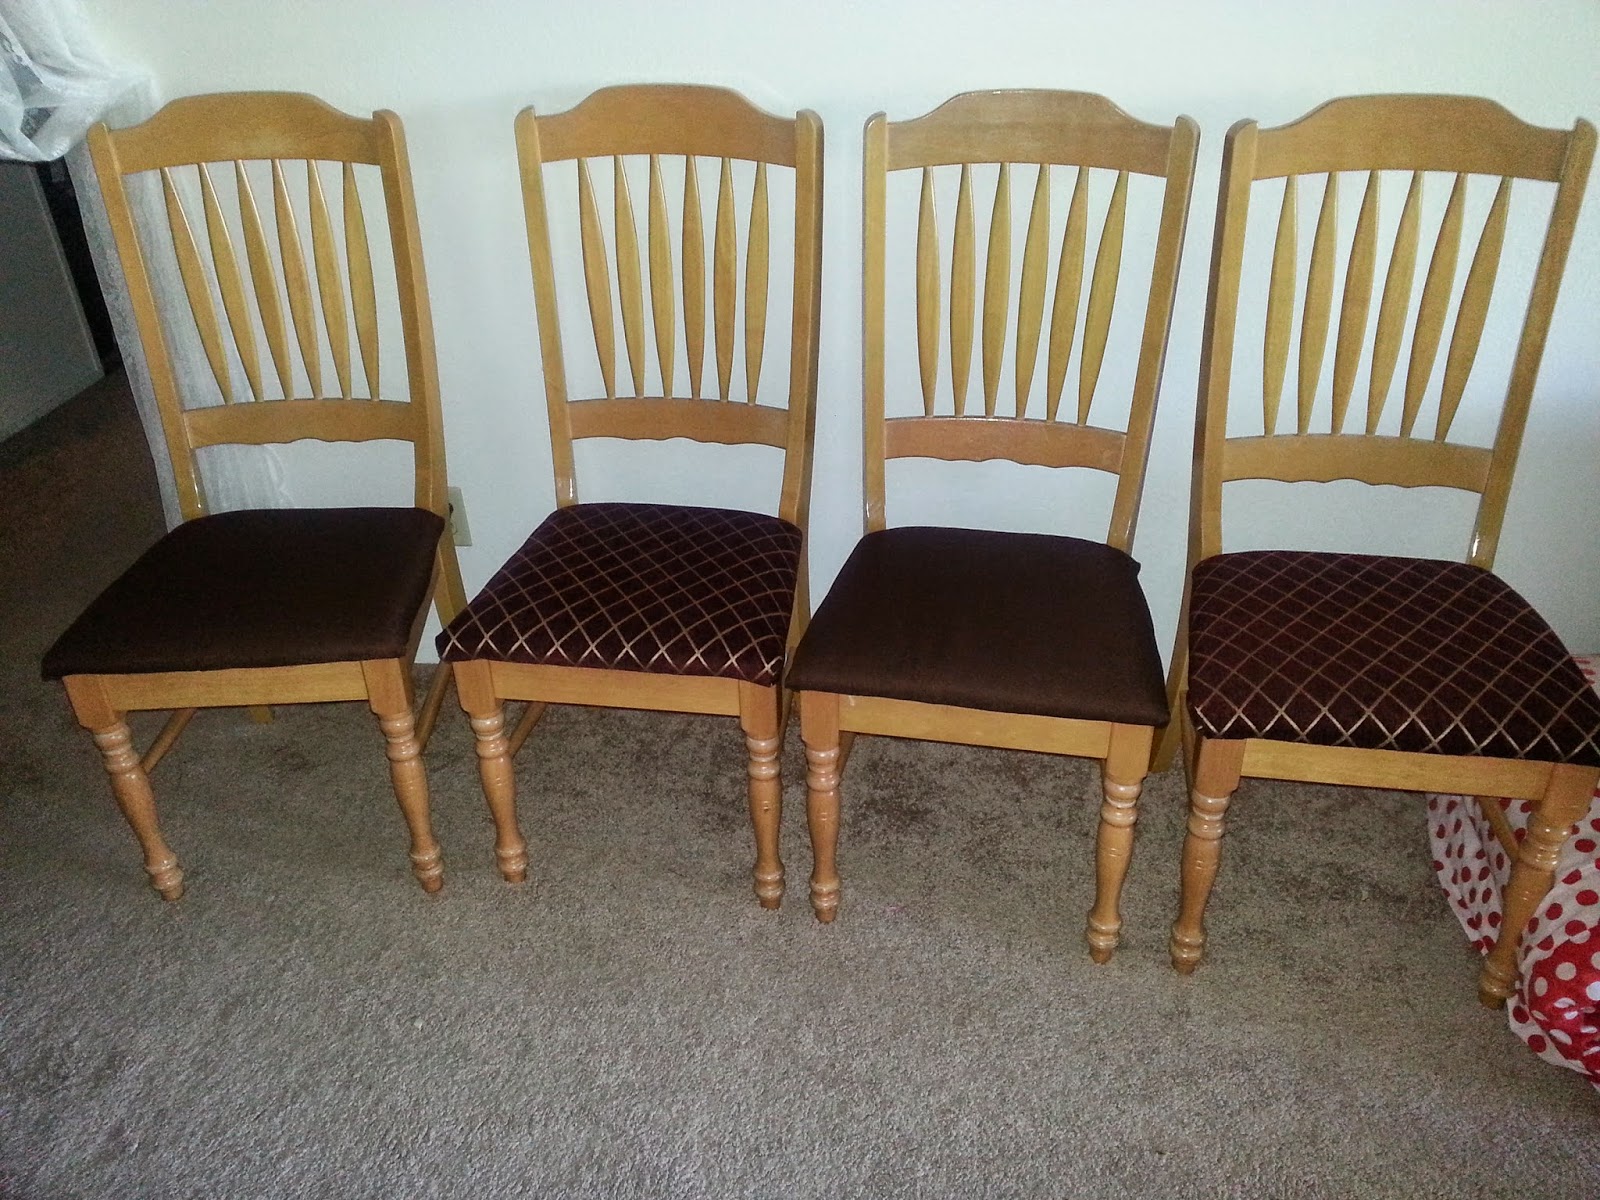 how to upholter a chair, do it yourself easy project, home decor, furniture renovation, spend less gain more 